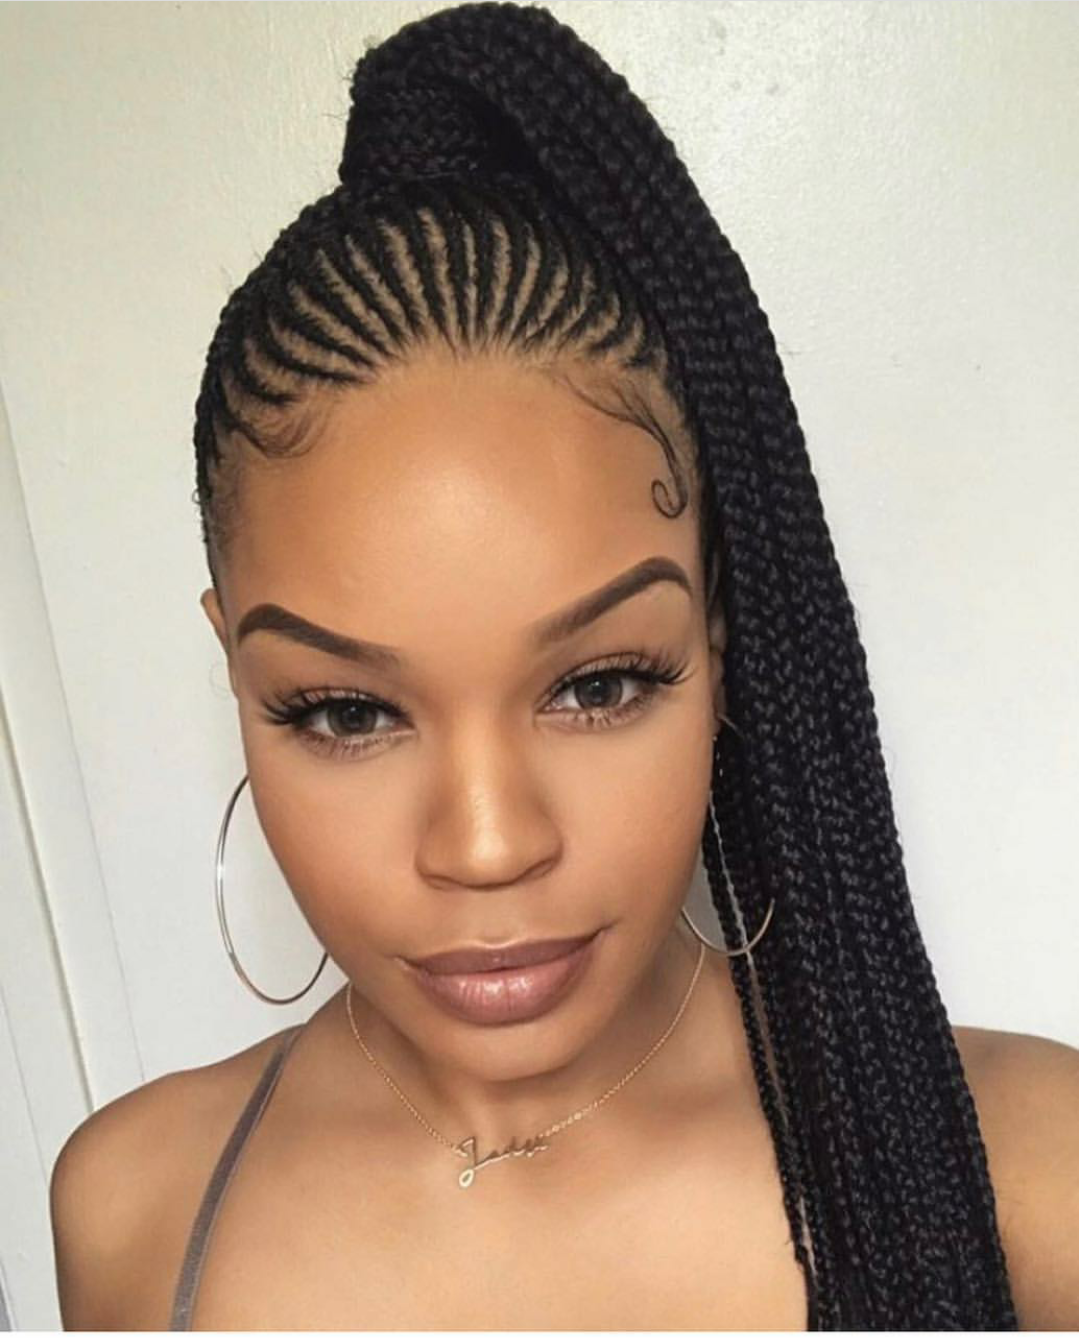 Stylish Ghana Braided Ideas To Try Out In 2019 With ...